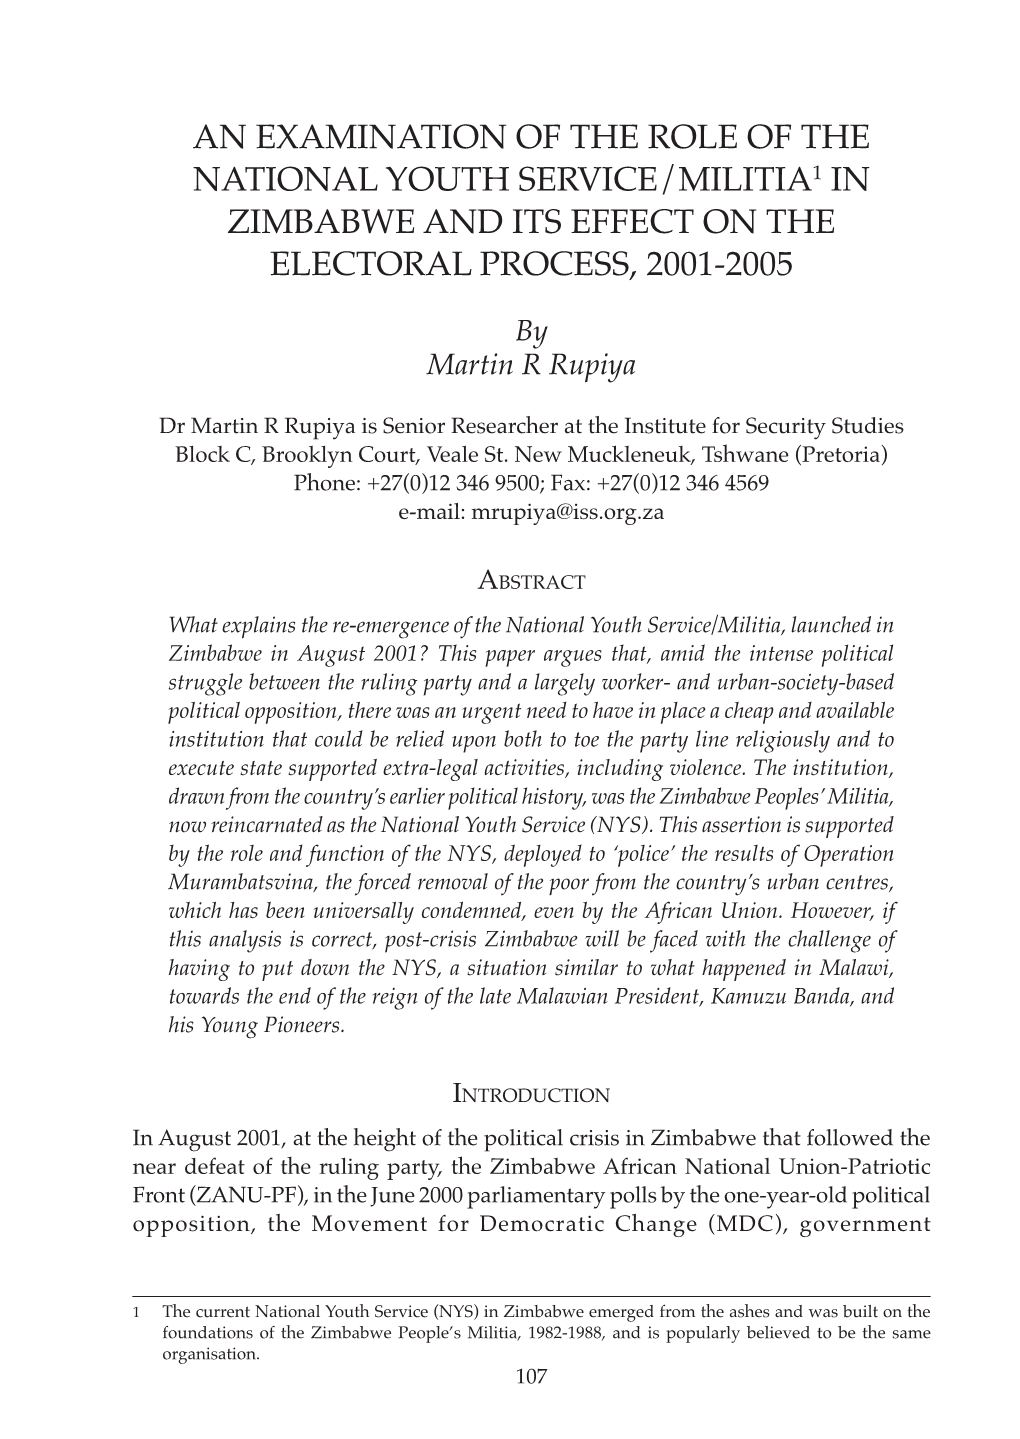 An Examination of the Role of the National Youth Service/Militia1 in Zimbabwe and Its Effect on the Electoral Process, 2001-2005